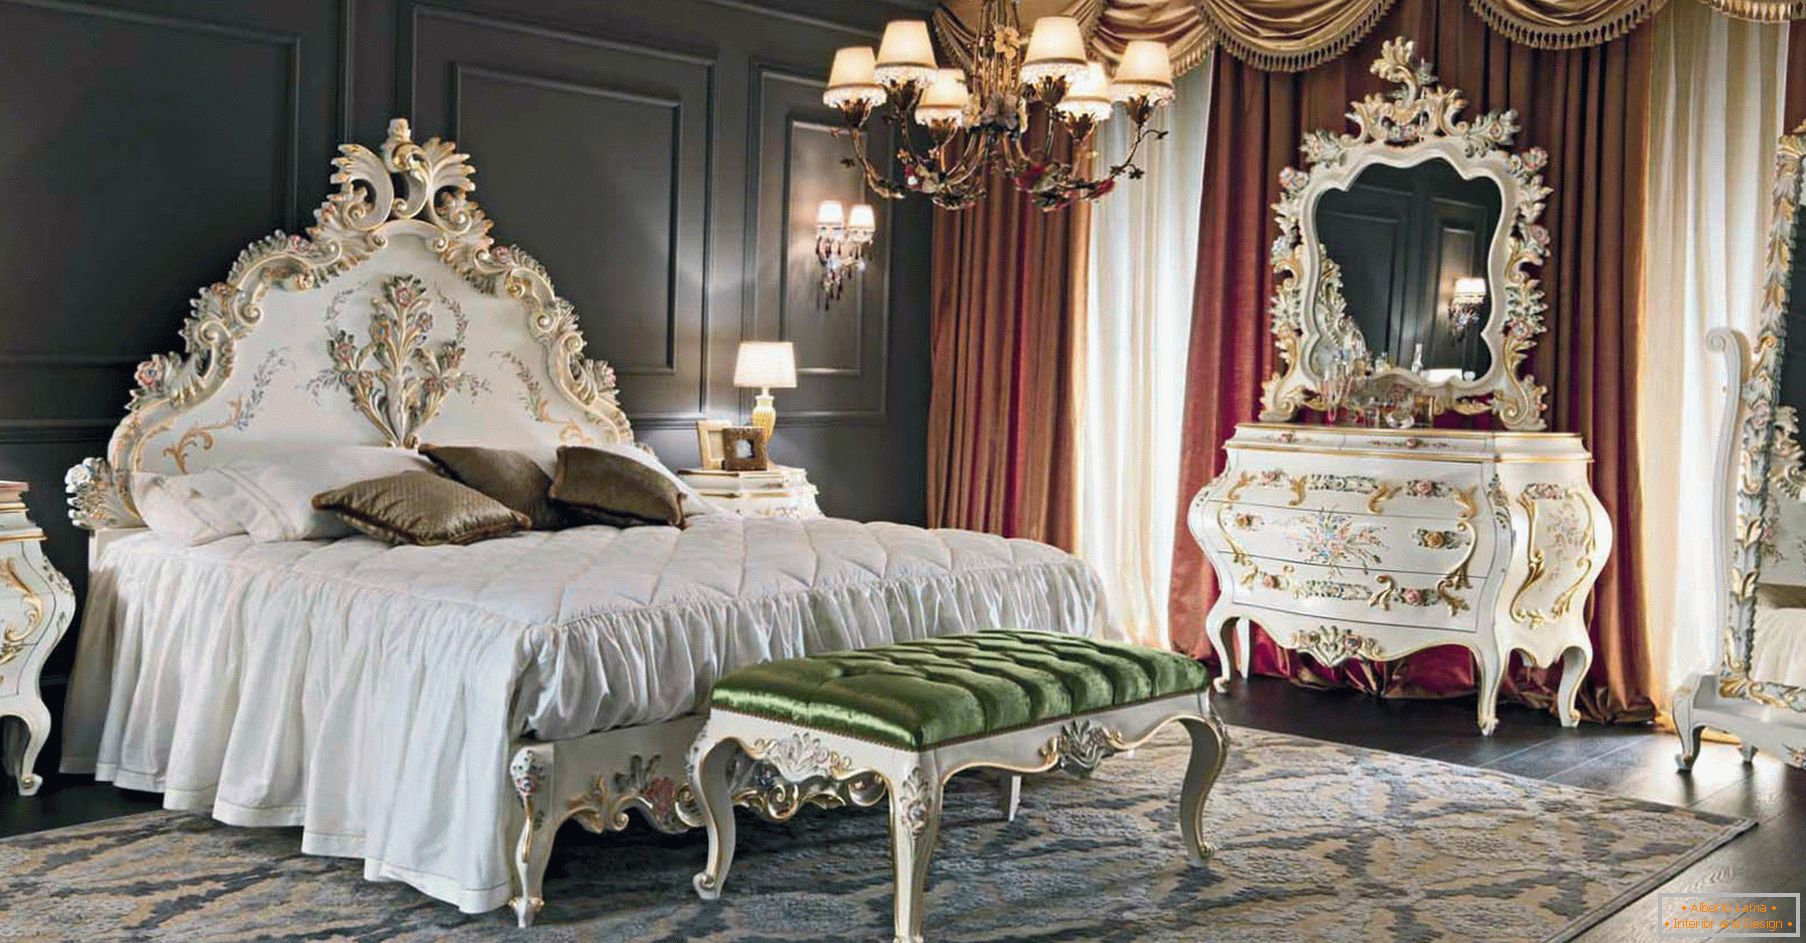 To decorate the bedroom, a contrast of dark brown, gold, red and white colors was used. The furniture is selected according to the style of the baroque.